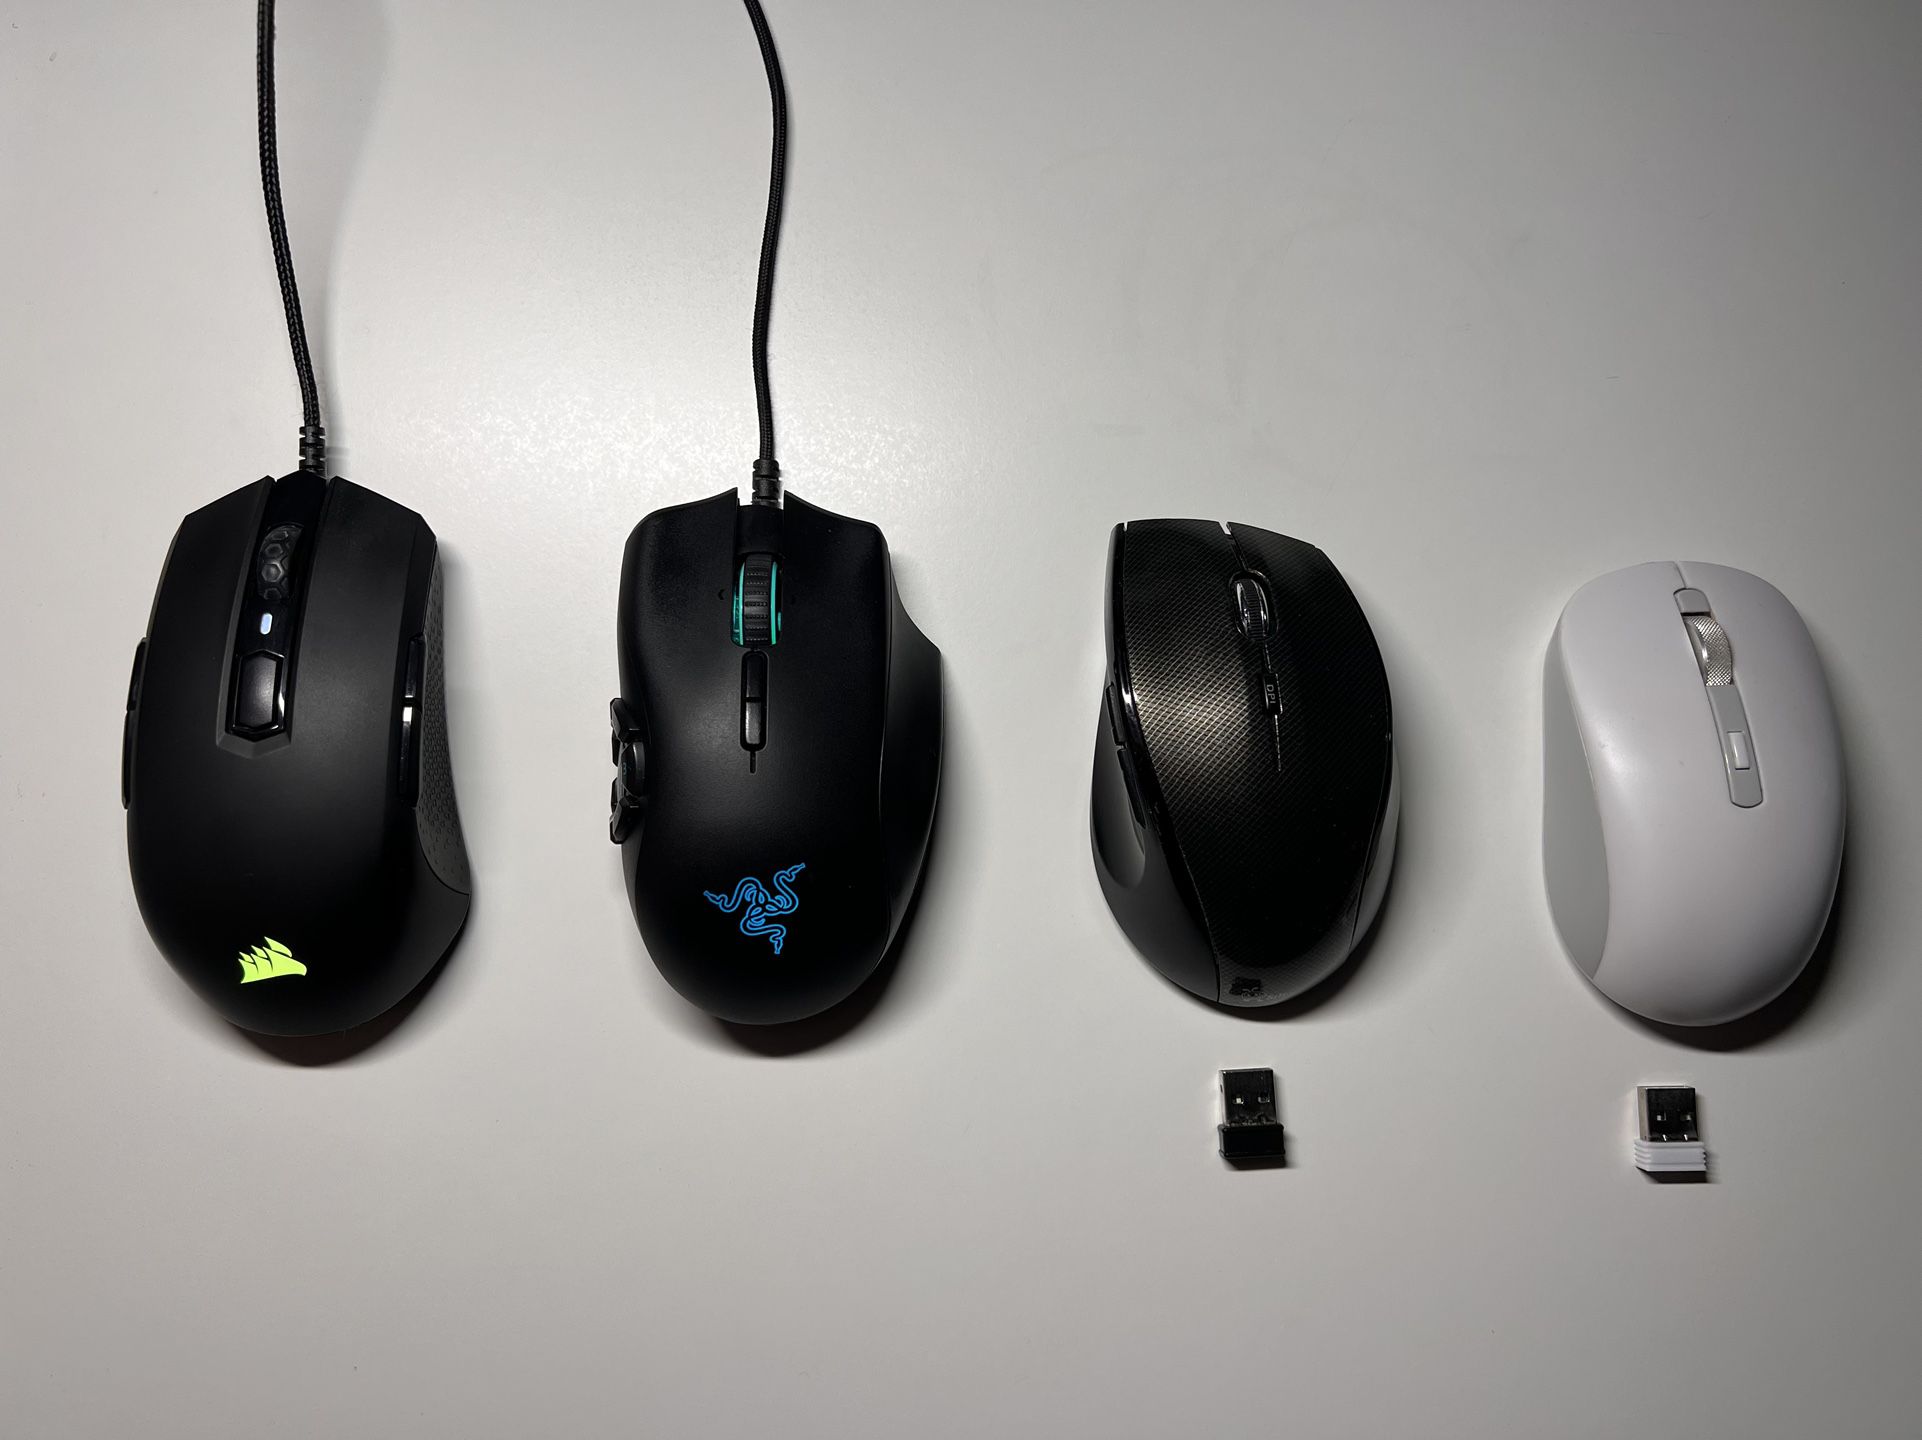 Selling 4 mouses (ALL FOR $60)